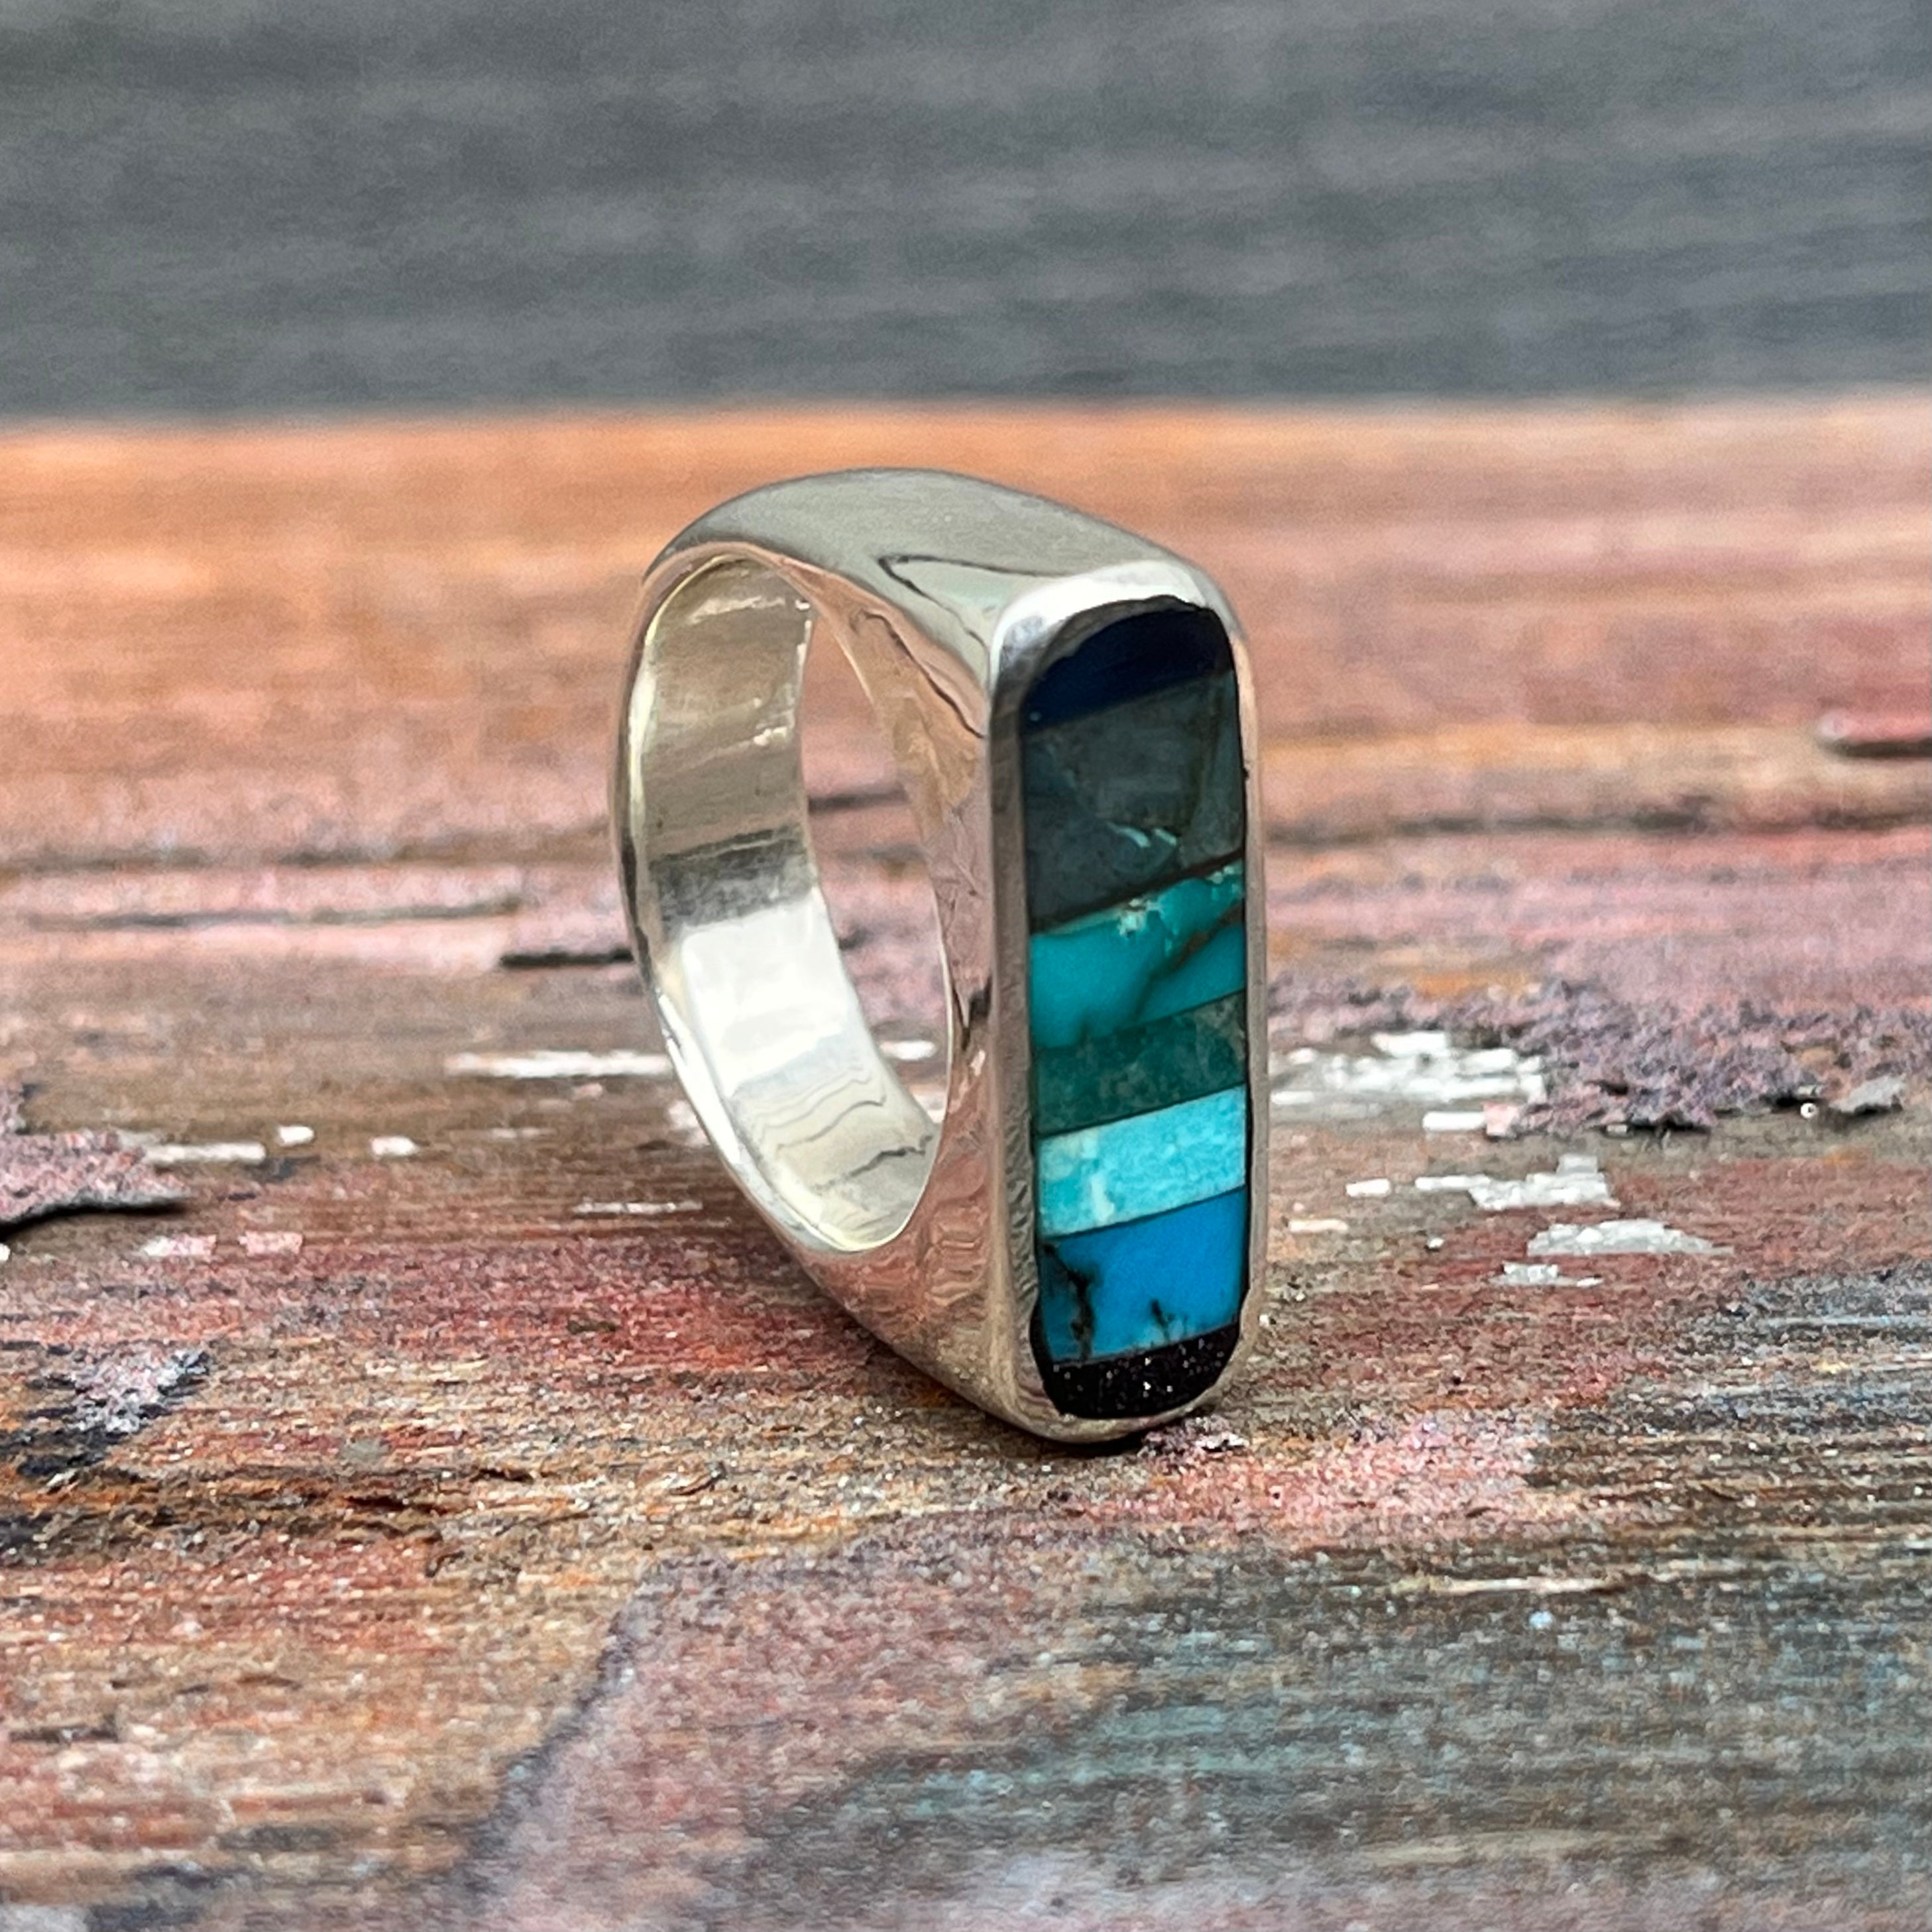 Oval Ocean Signet Ring - Size 6.75/7